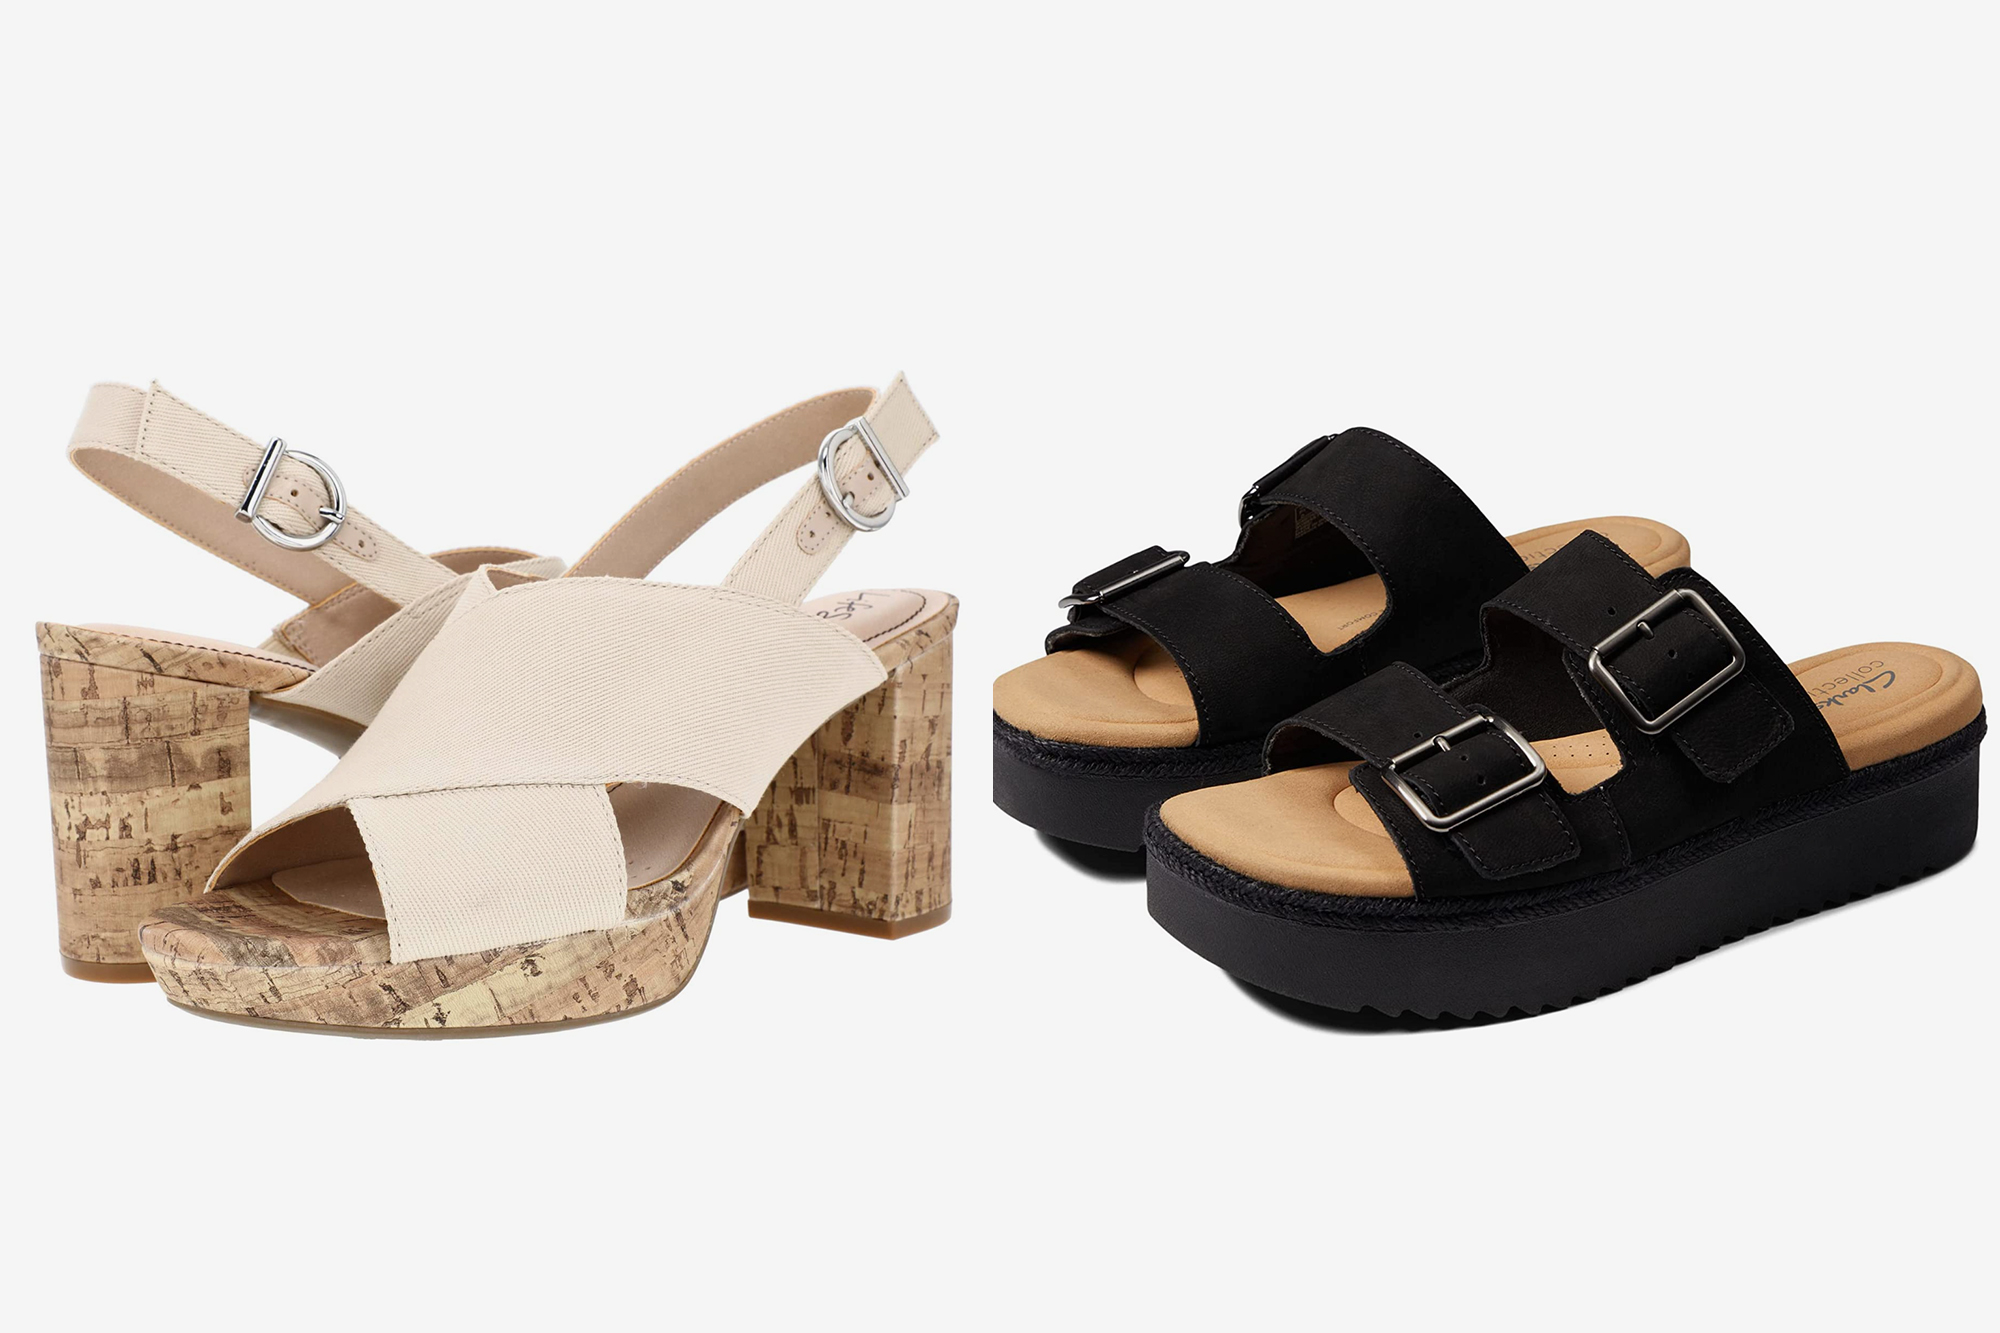 The Only Three Sandals You Need for a Comfortable and Stylish Summer! -  Baretraps Shoes